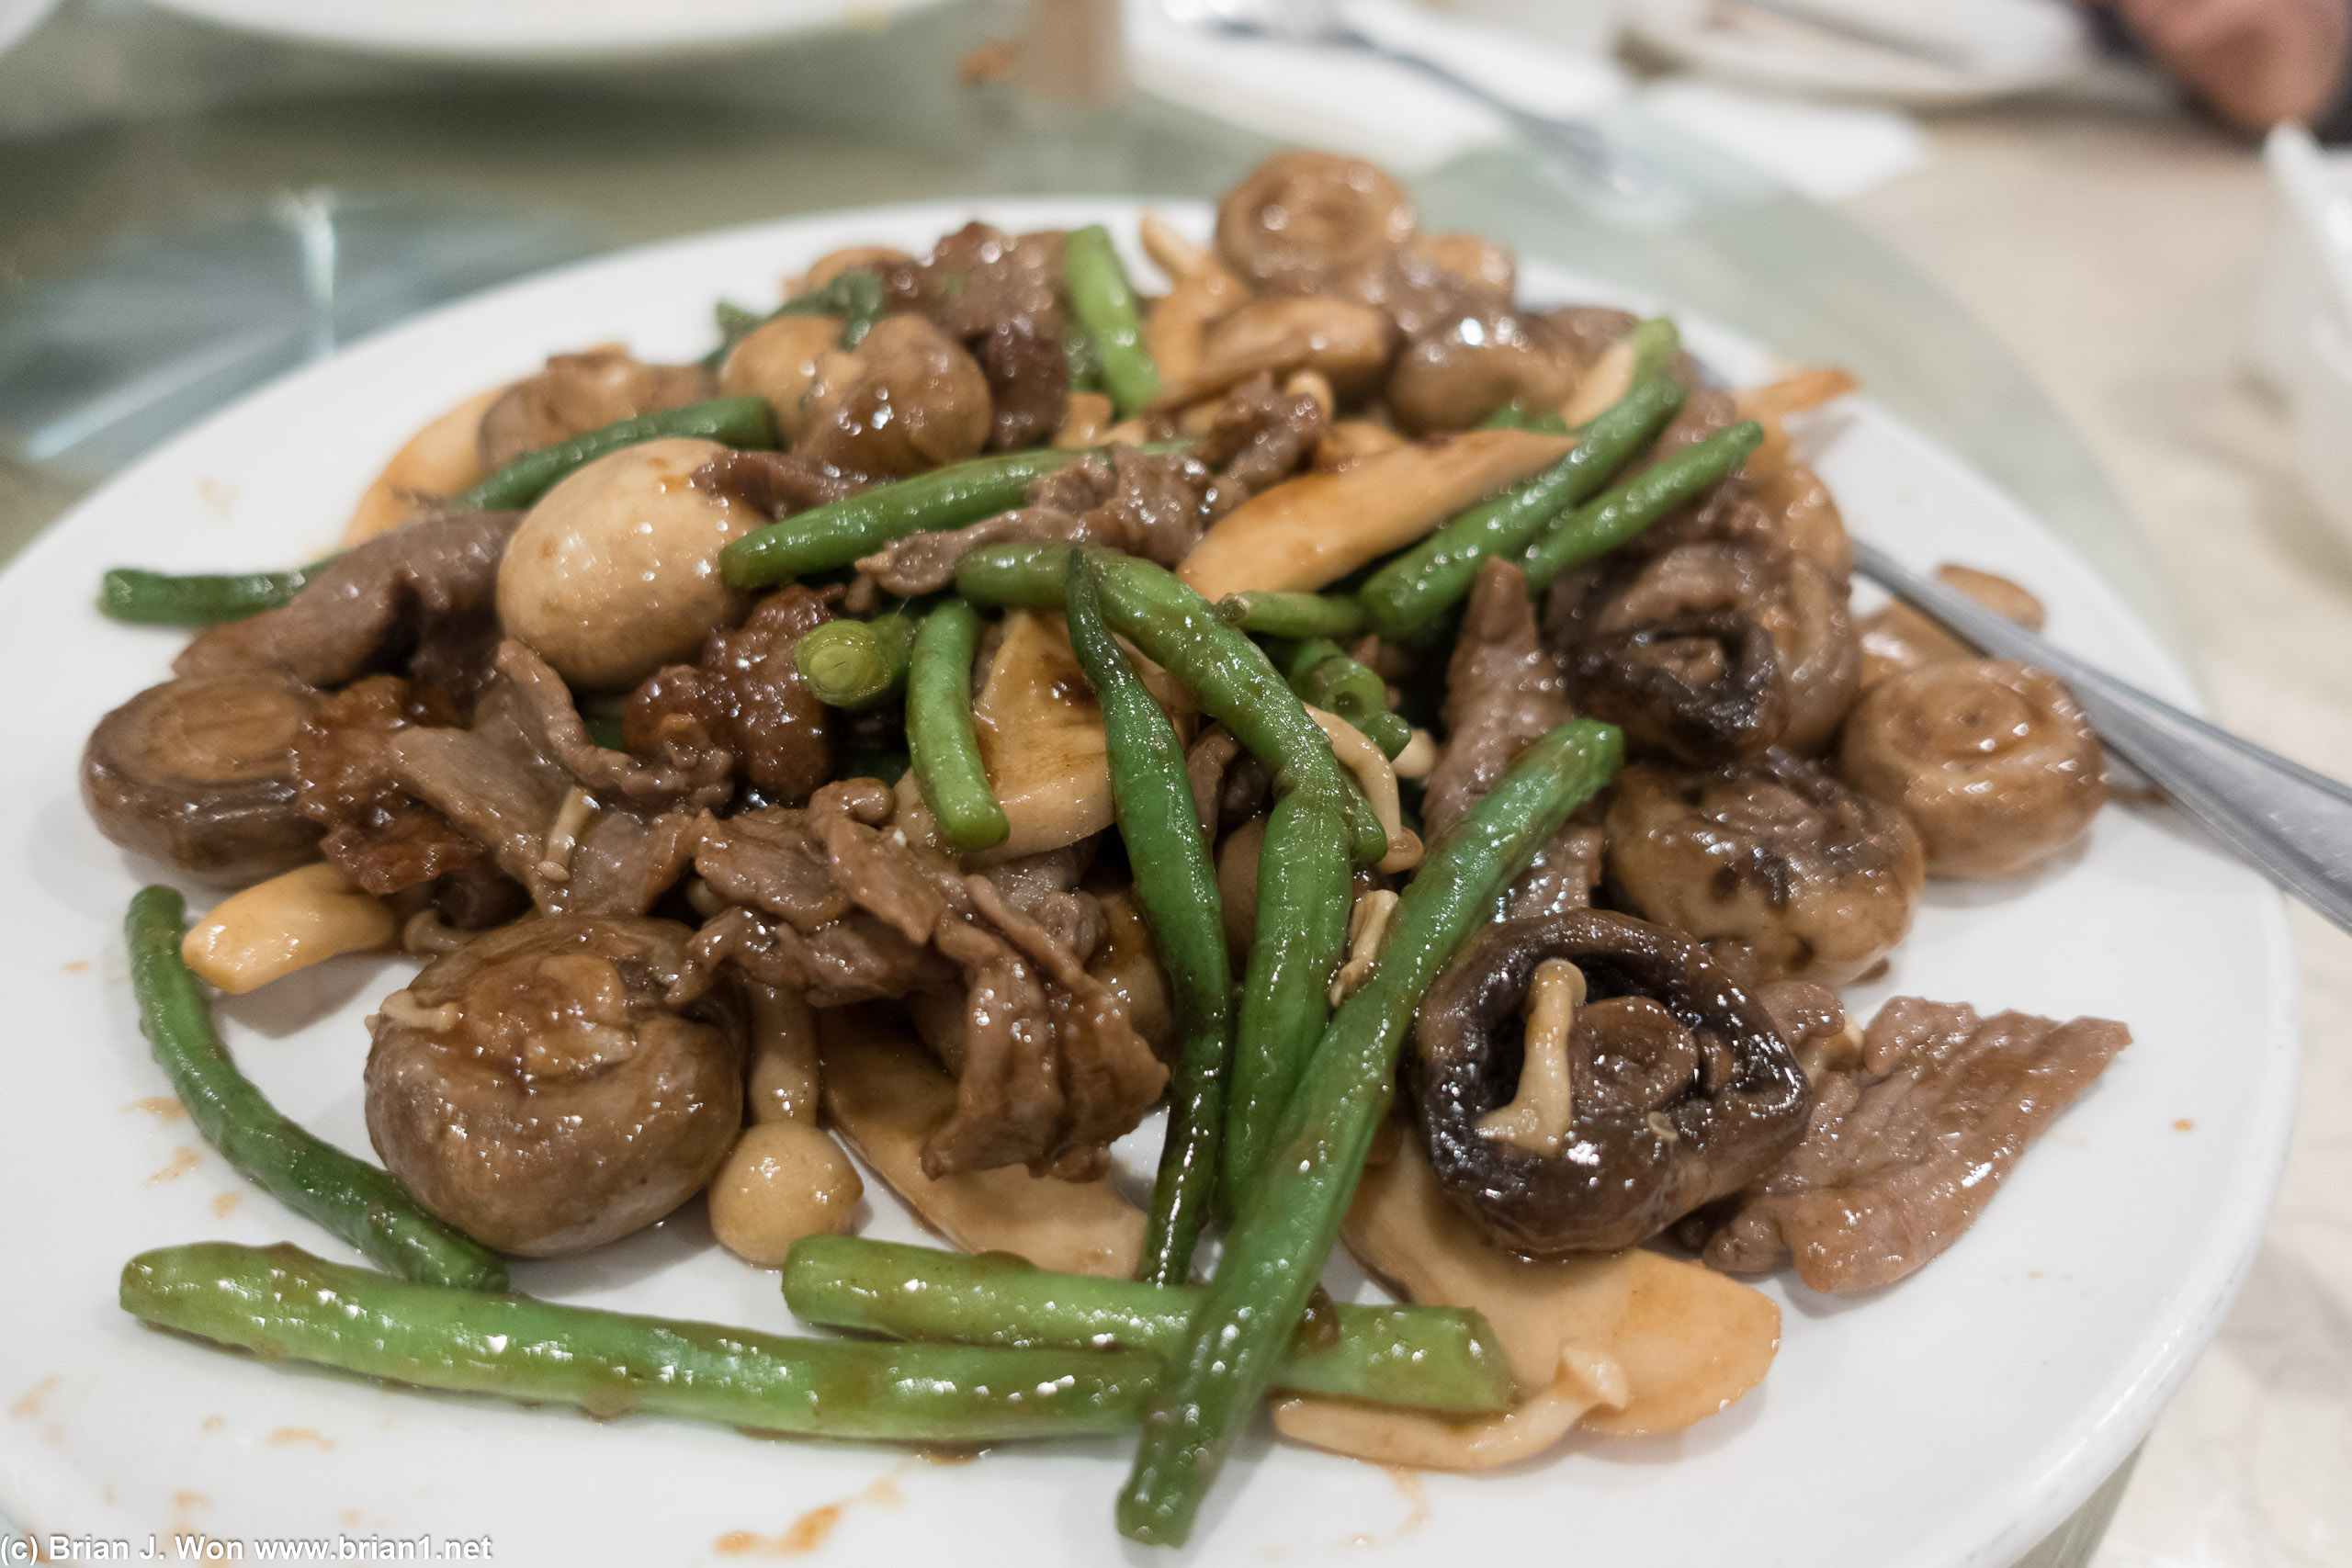 Three kinds of mushrooms, green beans, and beef.